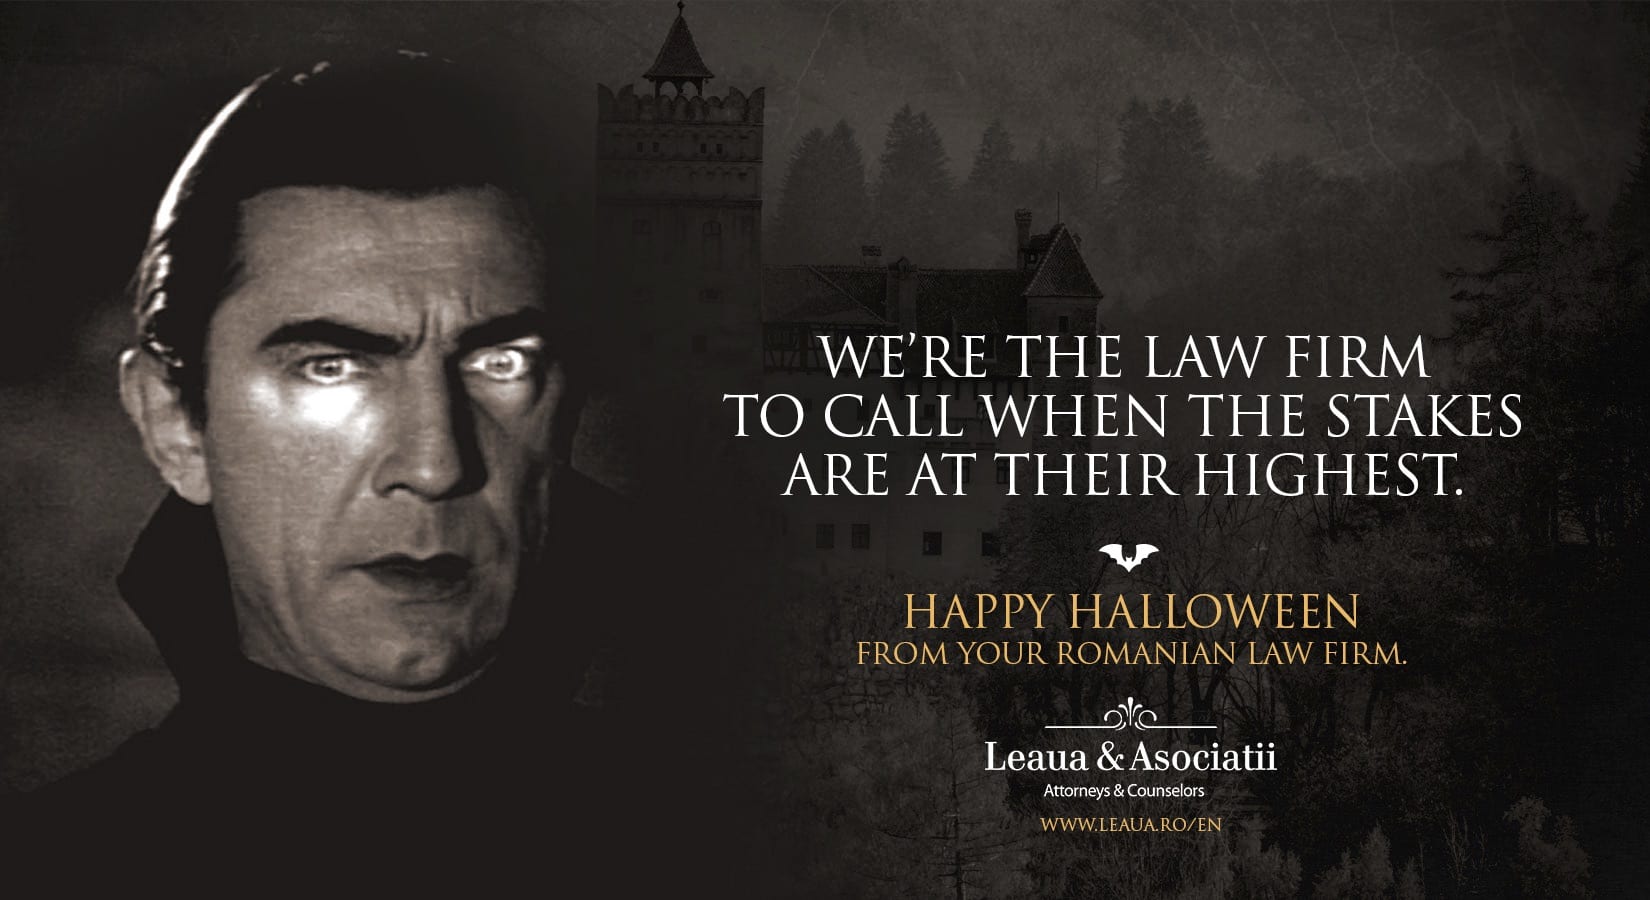 “Happy Halloween!” from Your Romanian Law Firm